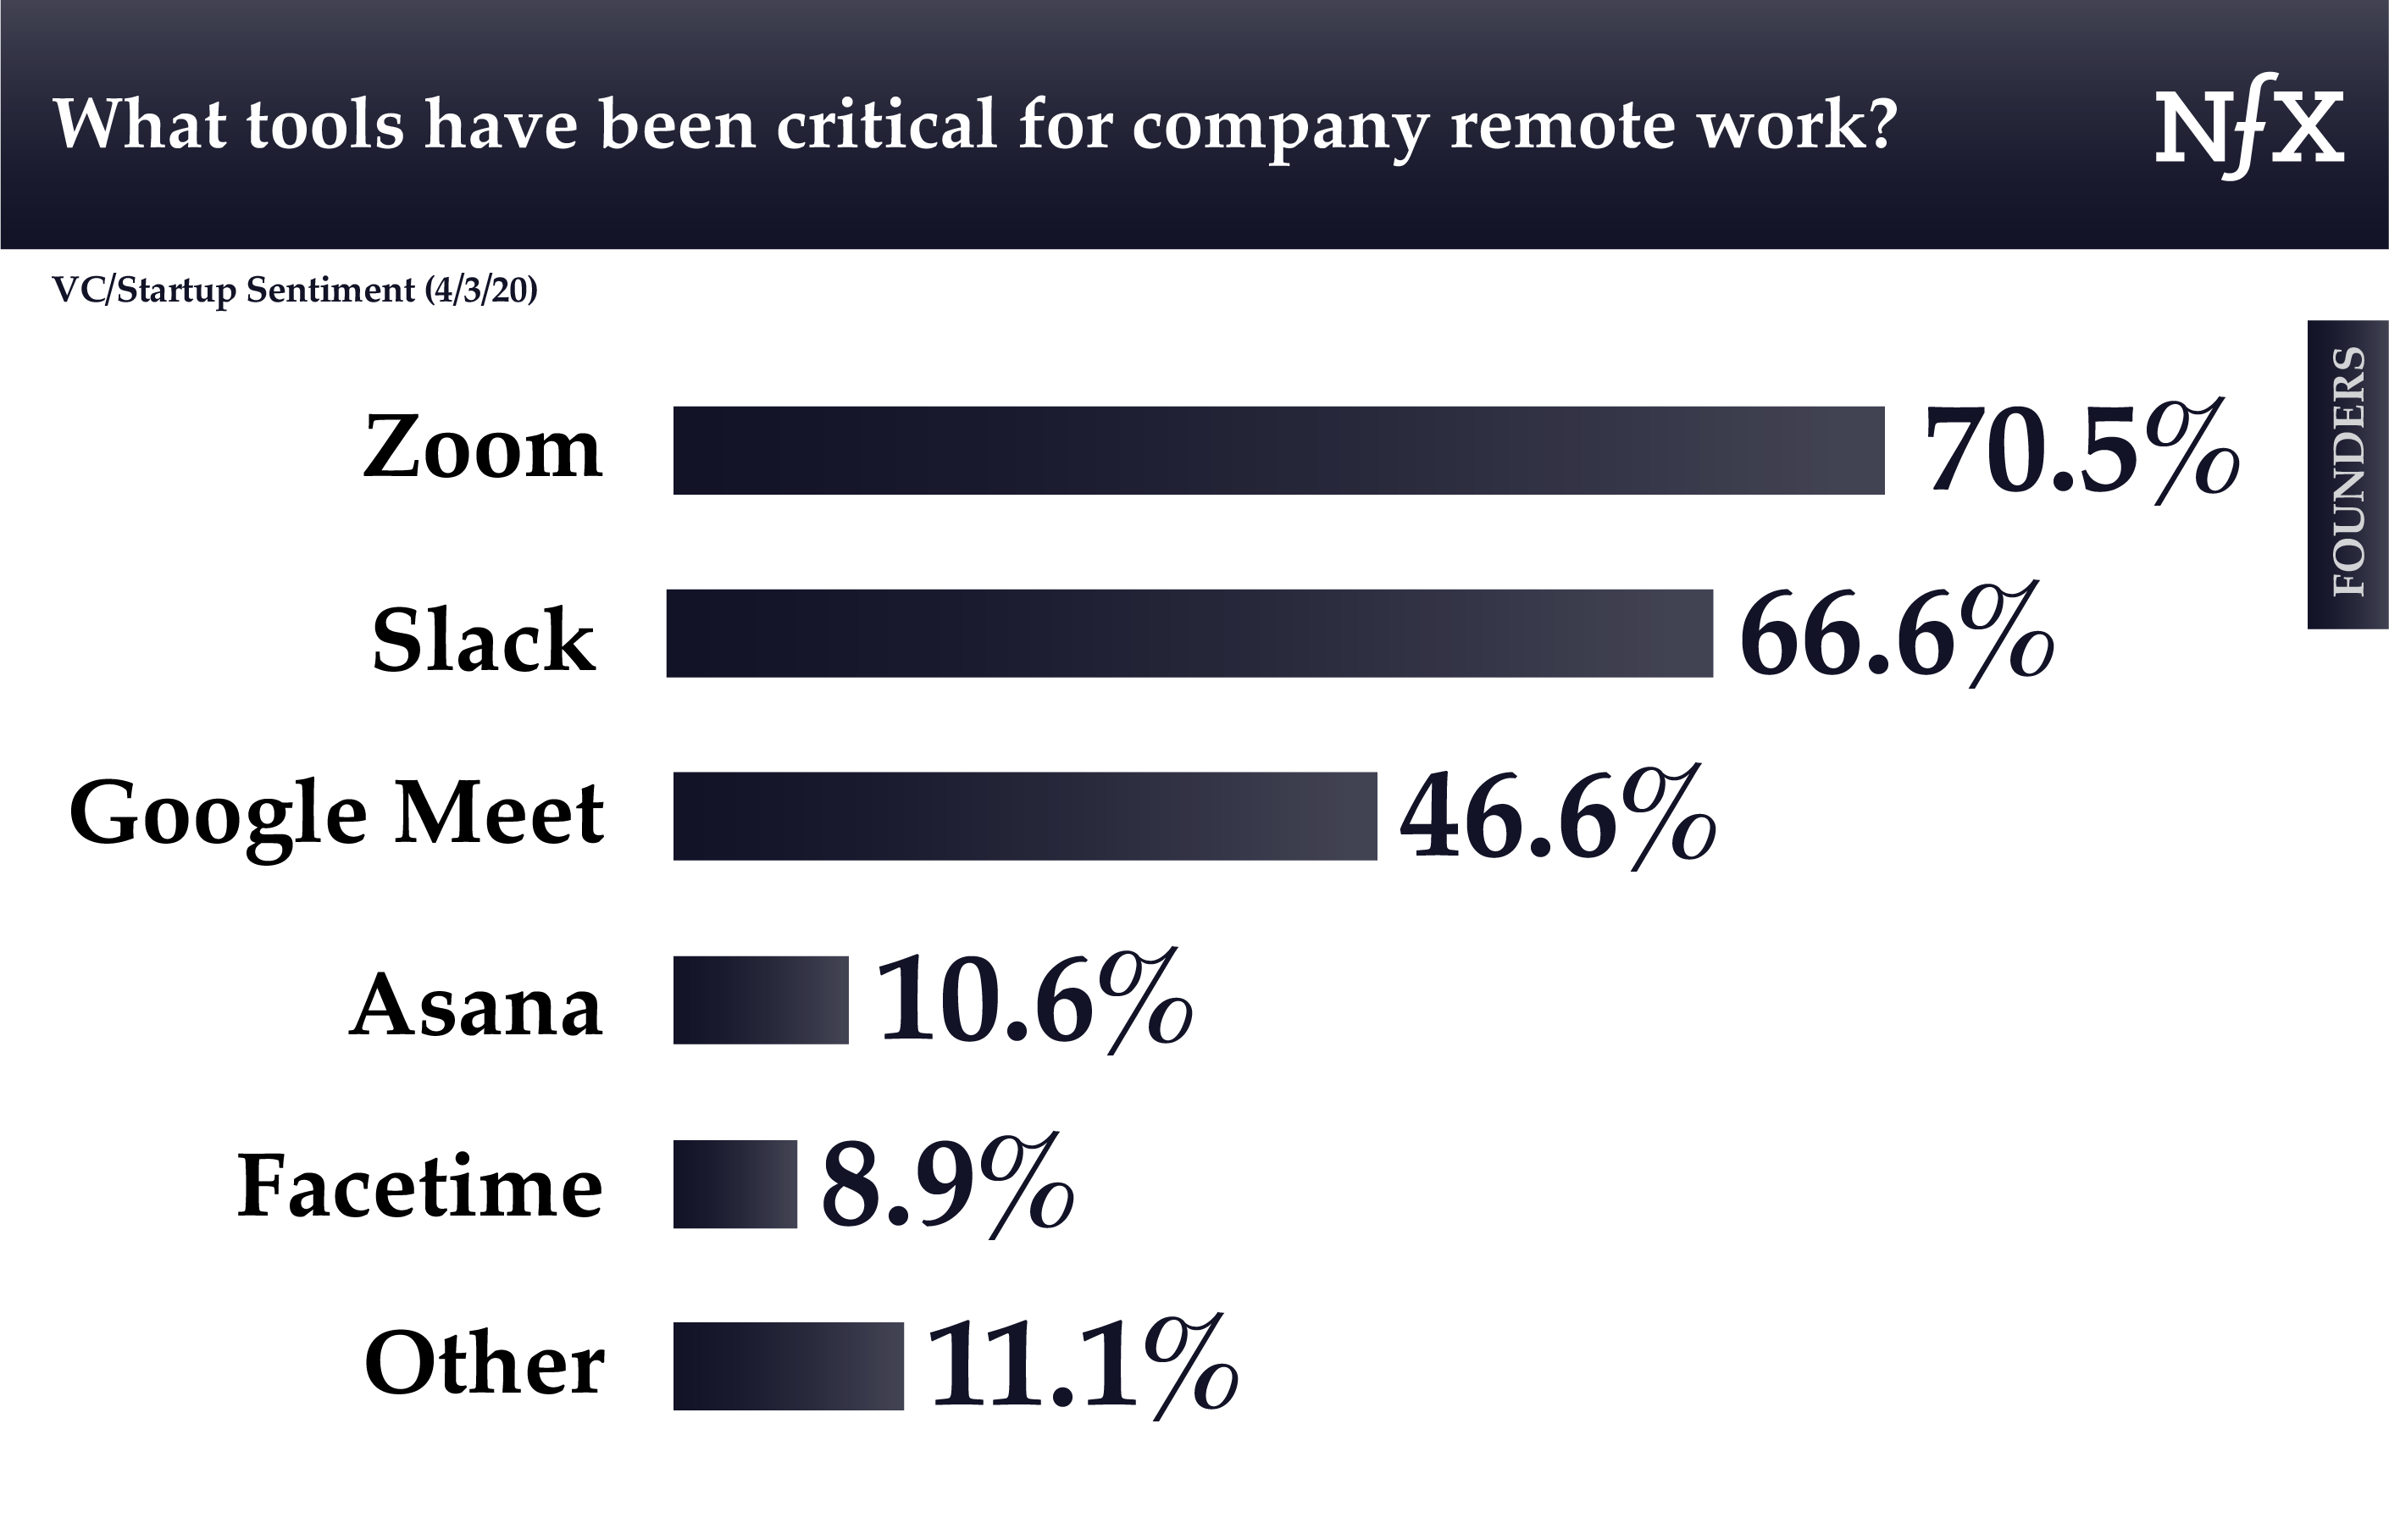 What tools have been critical for company remote work during COVID-19?